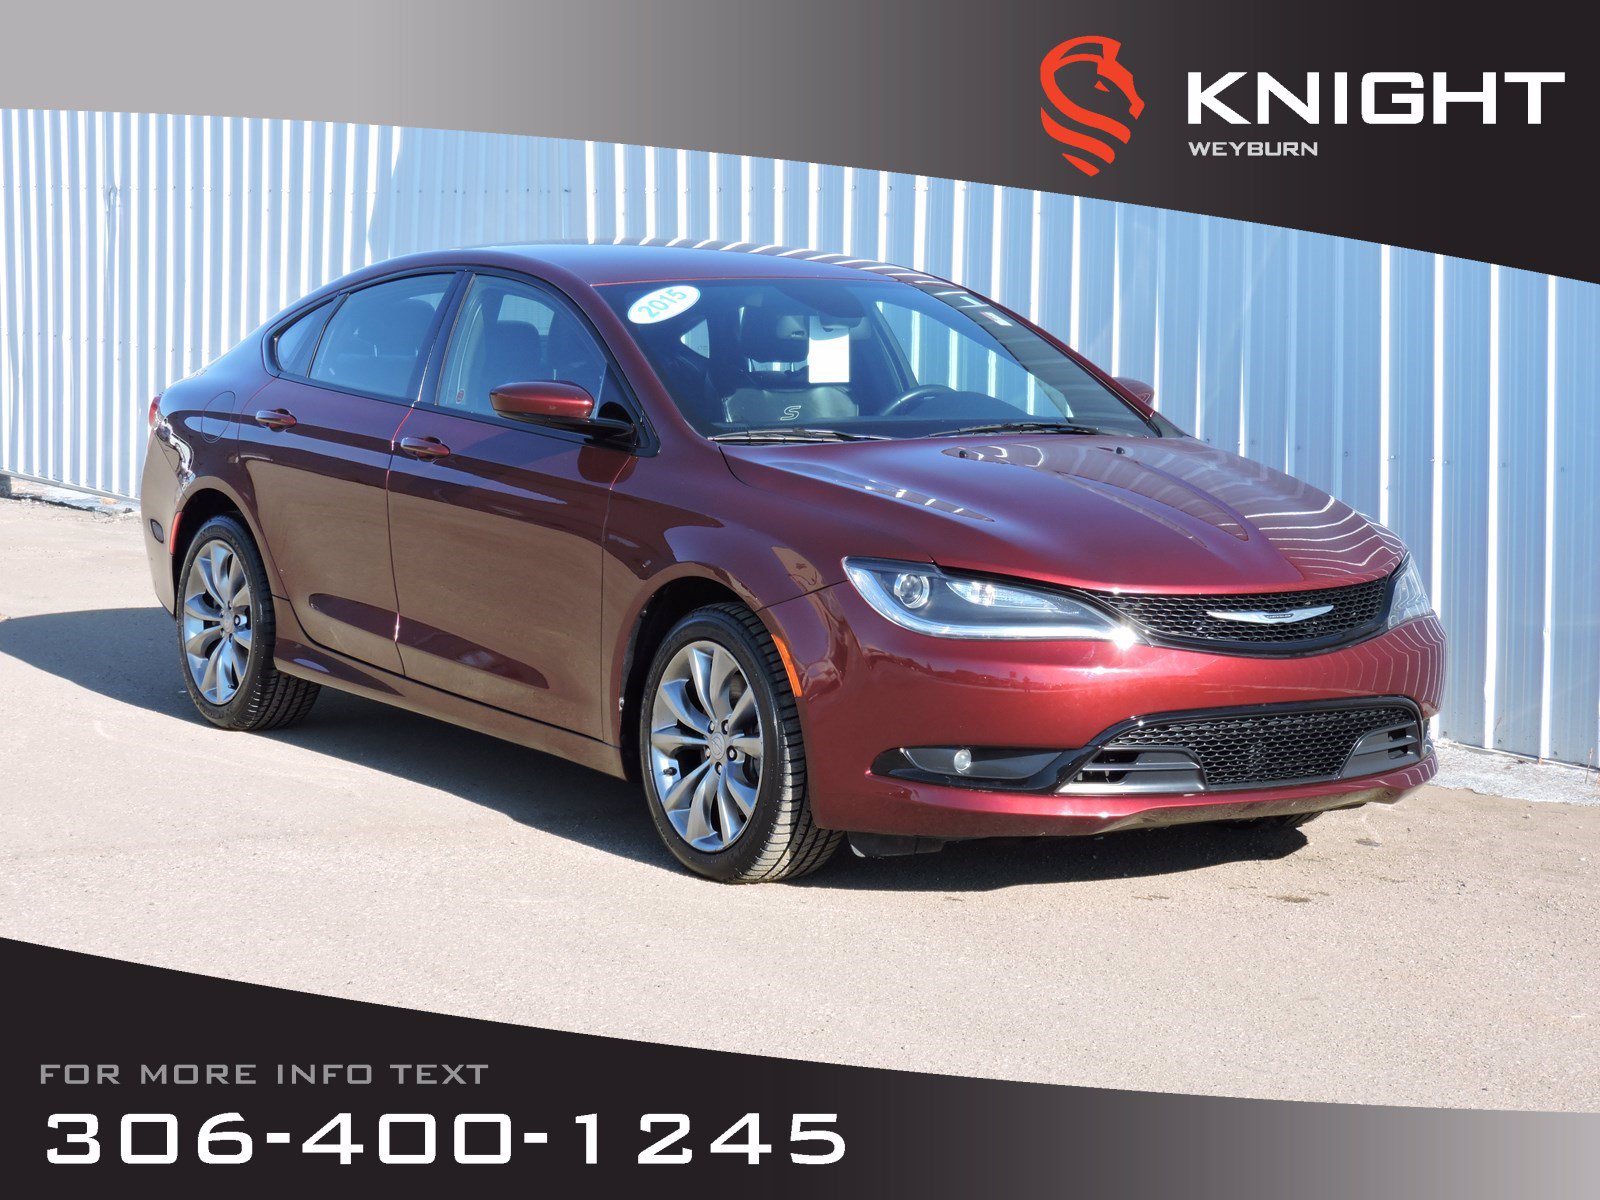 PreOwned 2015 Chrysler 200 S AWD Low KM Leather